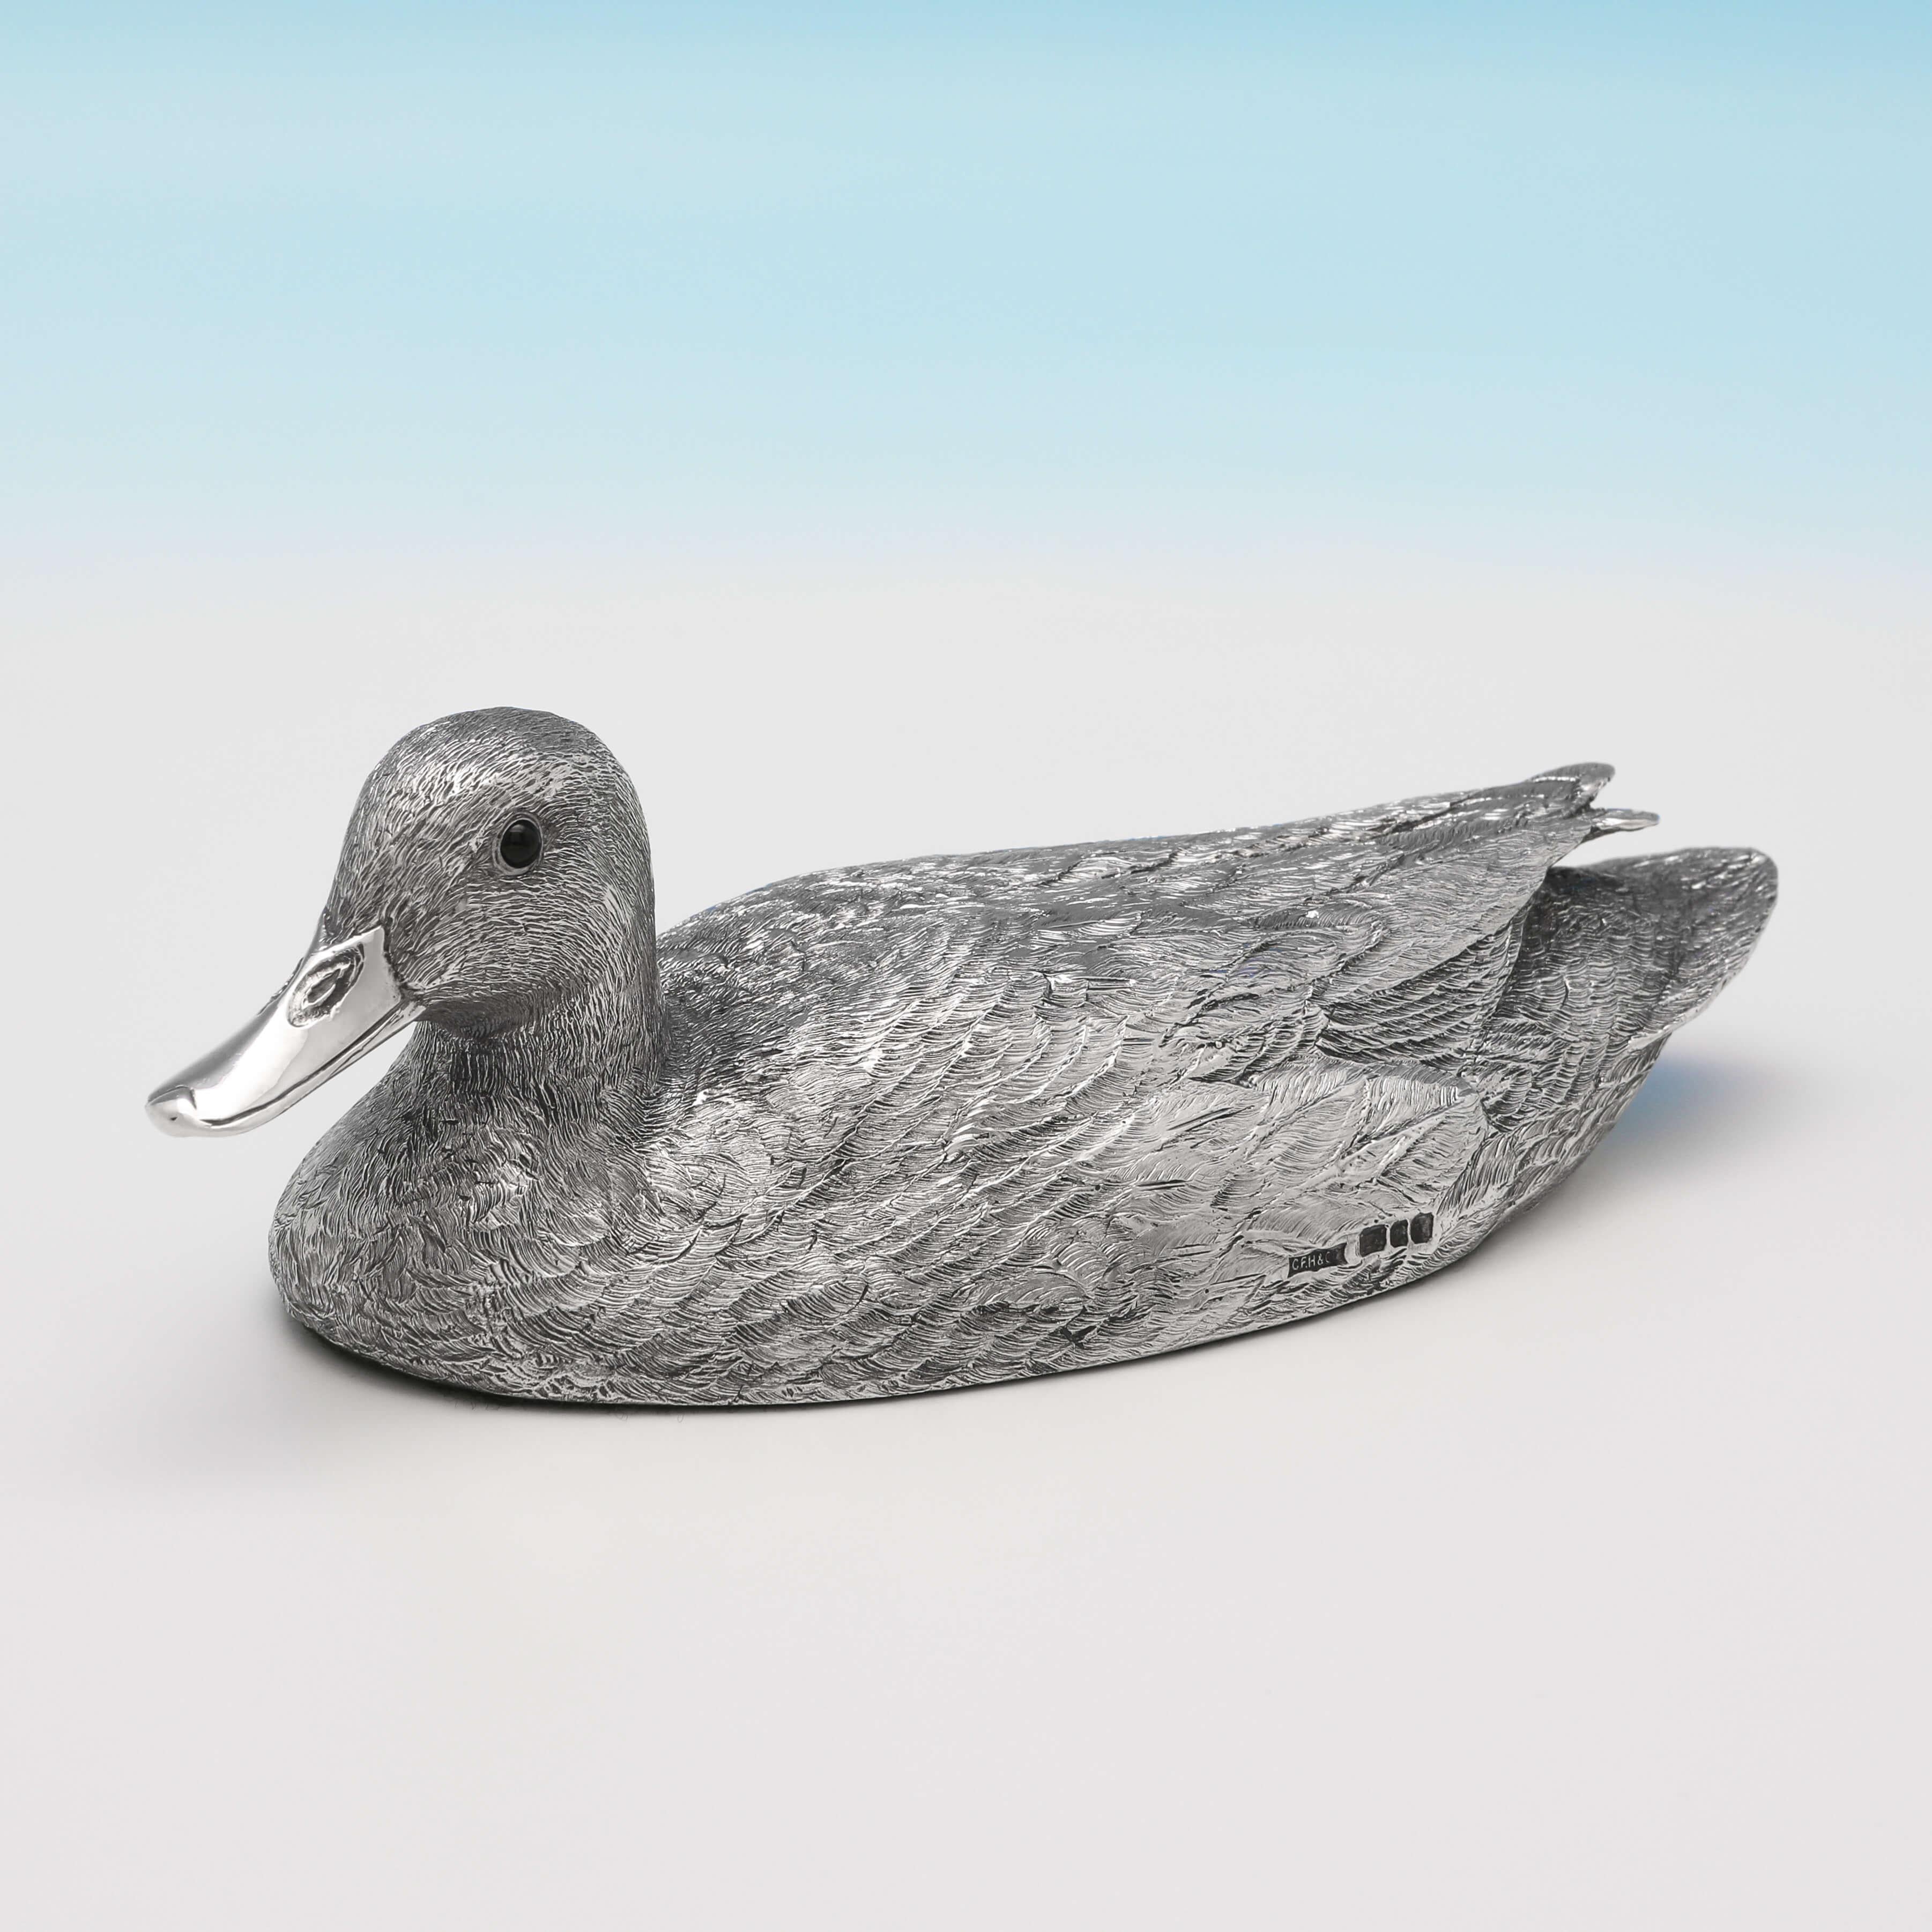 Hallmarked in London in 1989 by Hancocks & Co., this wonderfully modelled pair of Elizabeth II, sterling silver mallard ducks, are very realistically cast, with fine feather detailing and brown bead eyes. Each duck bears an engraved signature for